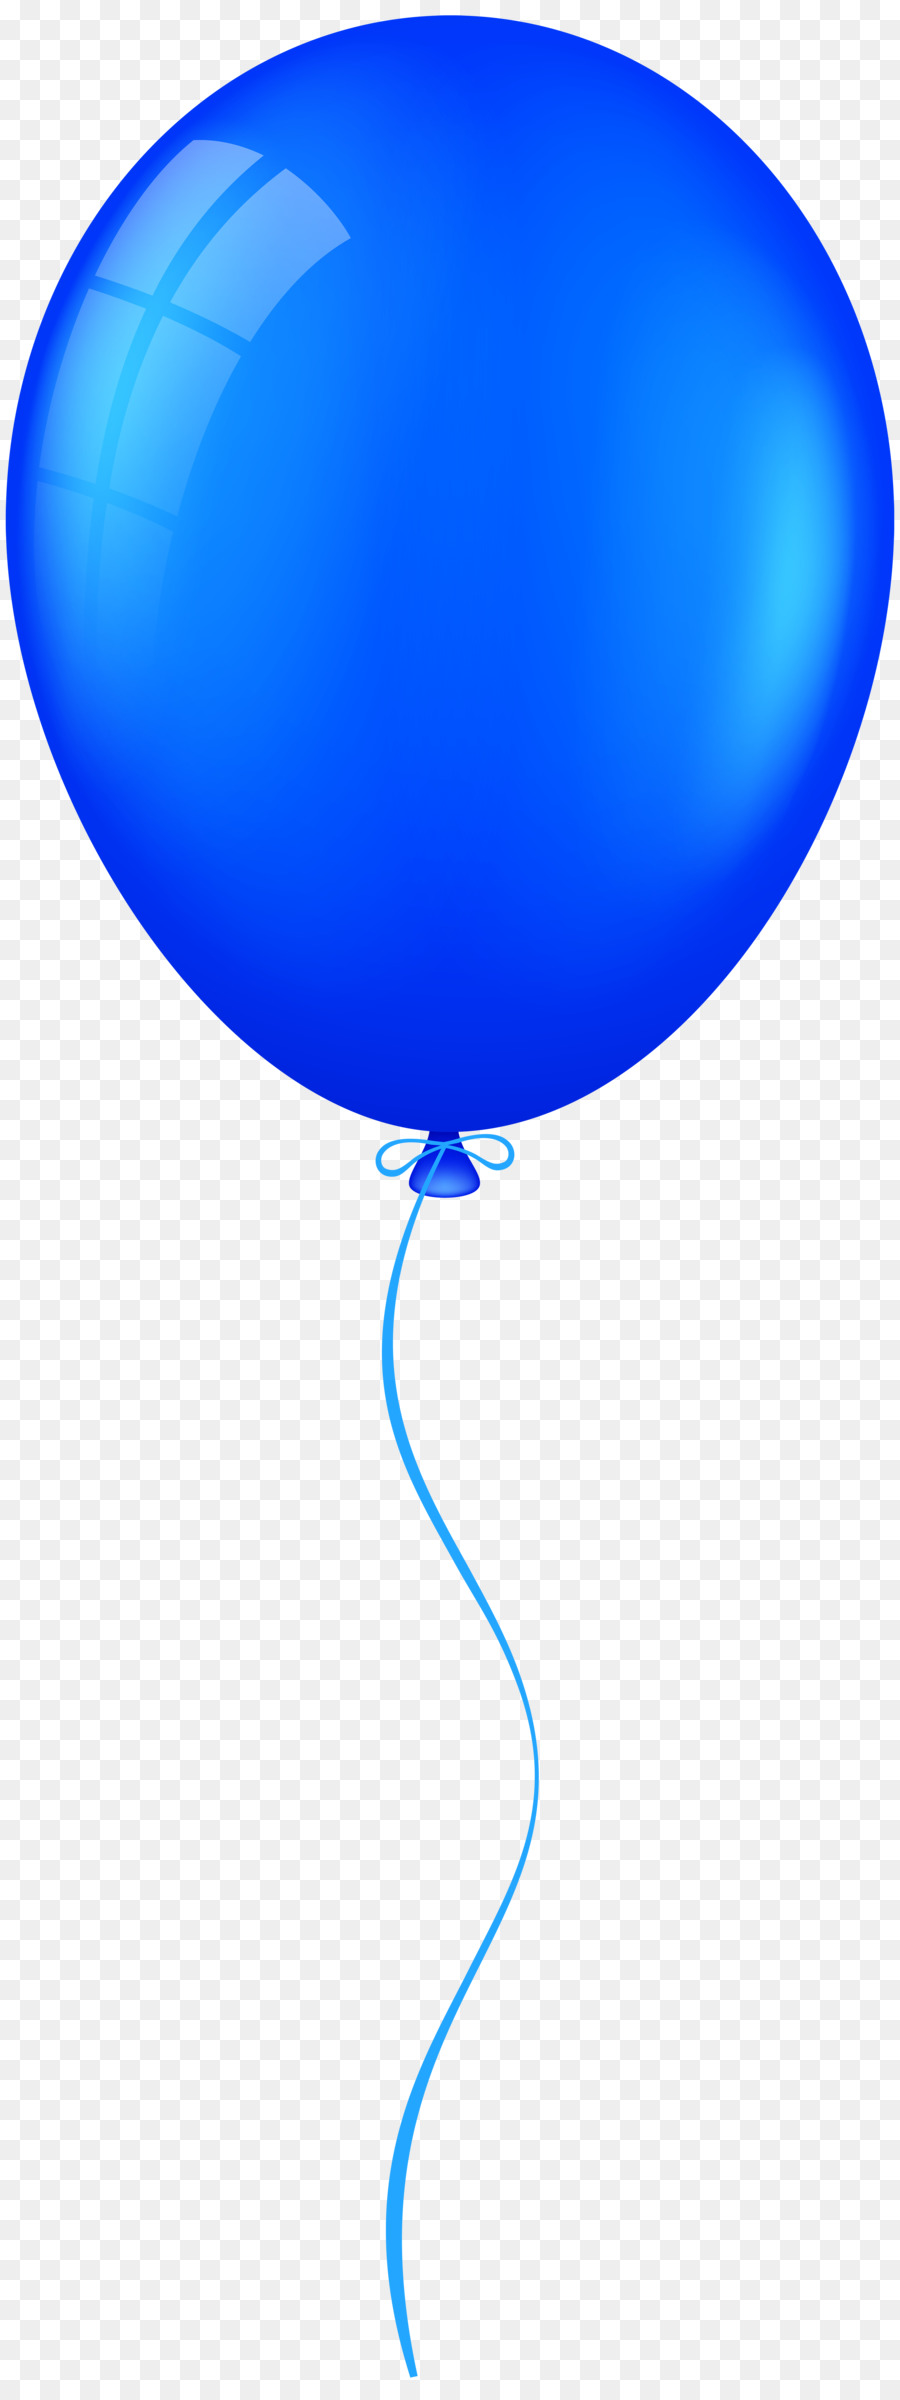 Balloon Blue Clip art - BALOON png download - 3009*8000 - Free ...